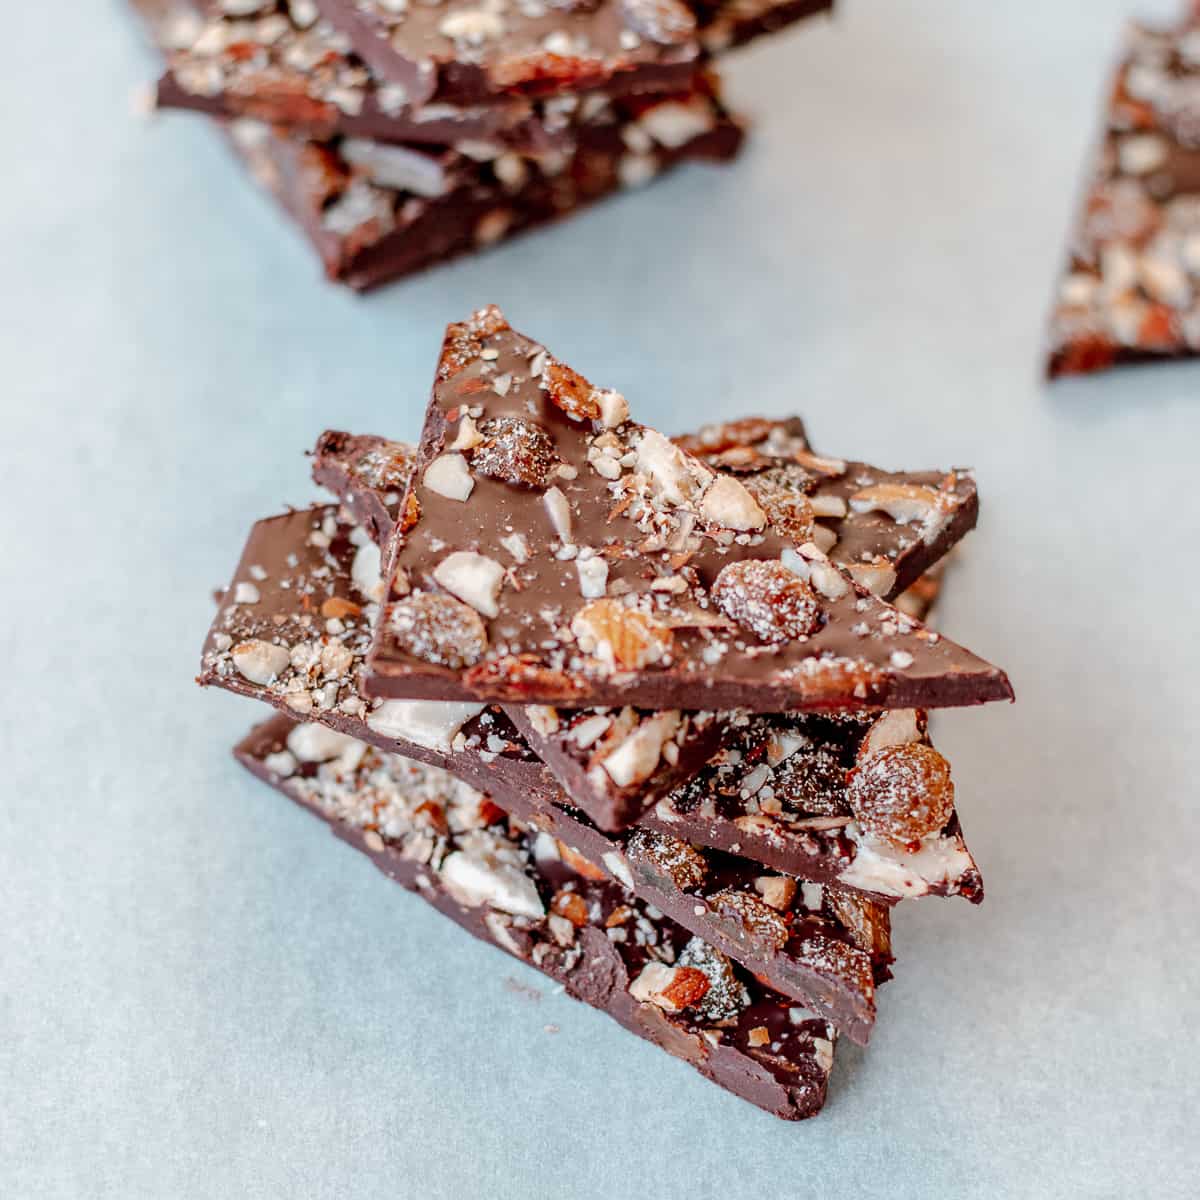 Dark chocolate bark with fruit and nuts cut into shards